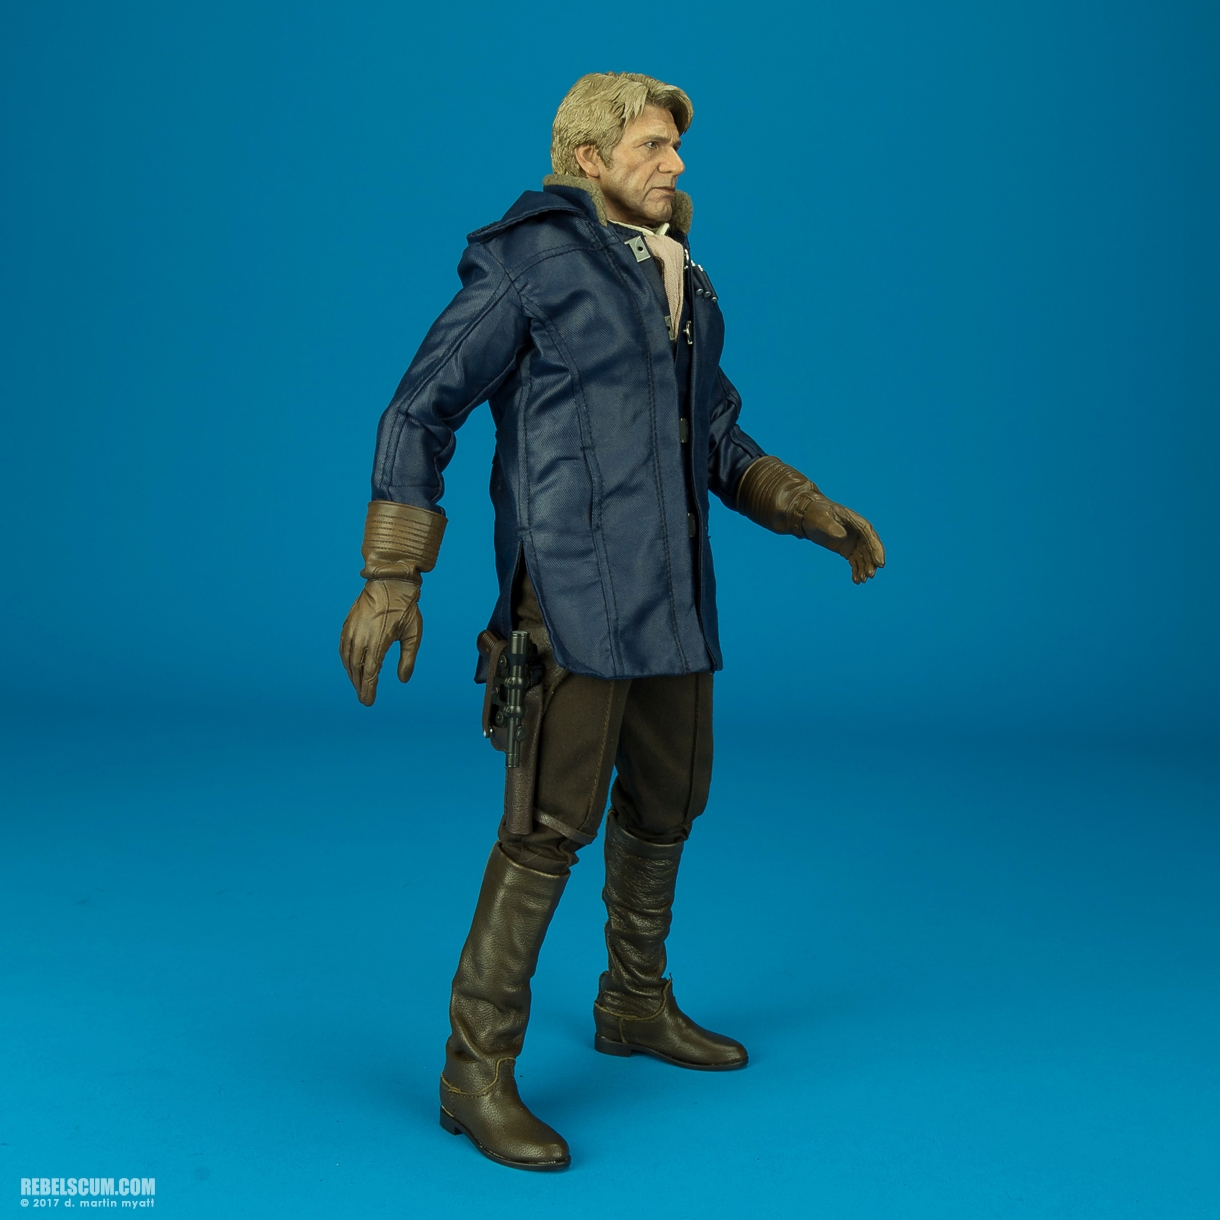 MMS376-Han-Solo-Chewbacca-The-Force-Awakens-Hot-Toys-006.jpg